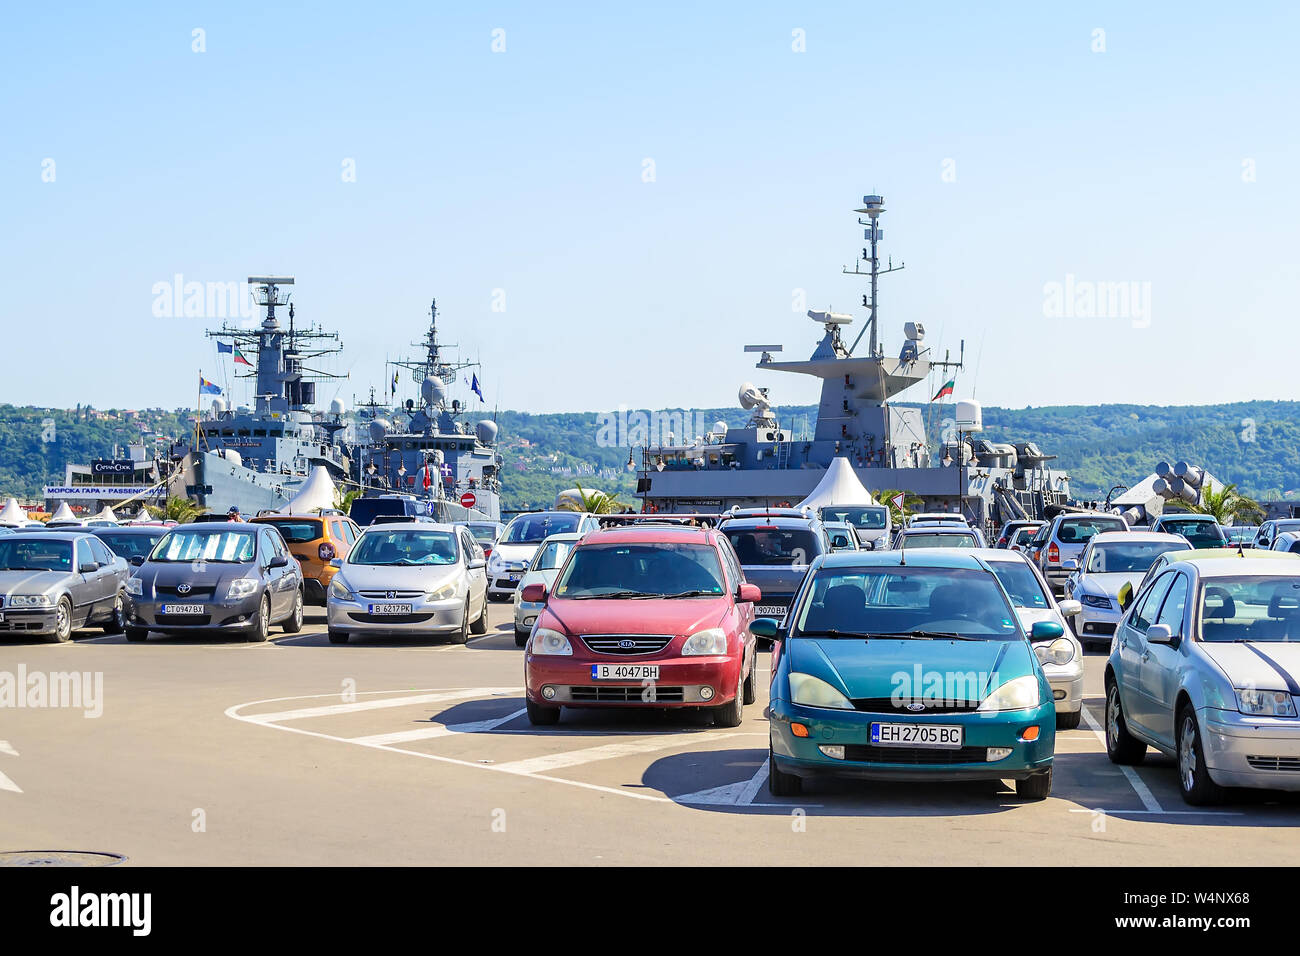 Varna, Bulgaria, July 20, 2019. Three large gray modern warships at the pier in the seaport of Varna. View from the parking lot on a sunny summer day. Stock Photo